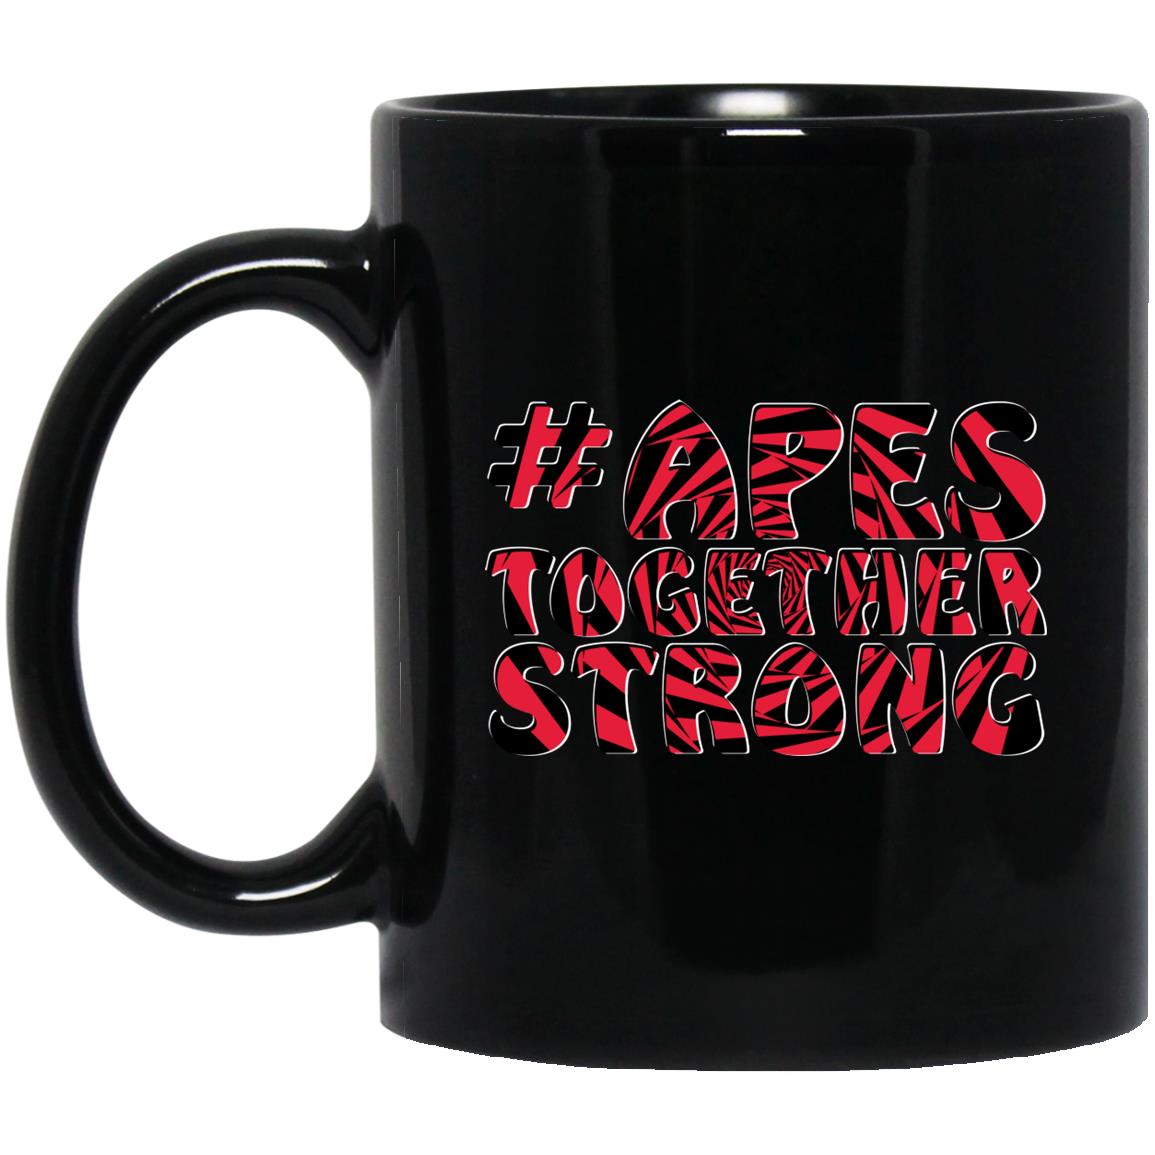 #APESTOGETHERSTRONG - Cups Mugs Black, White & Color-Changing